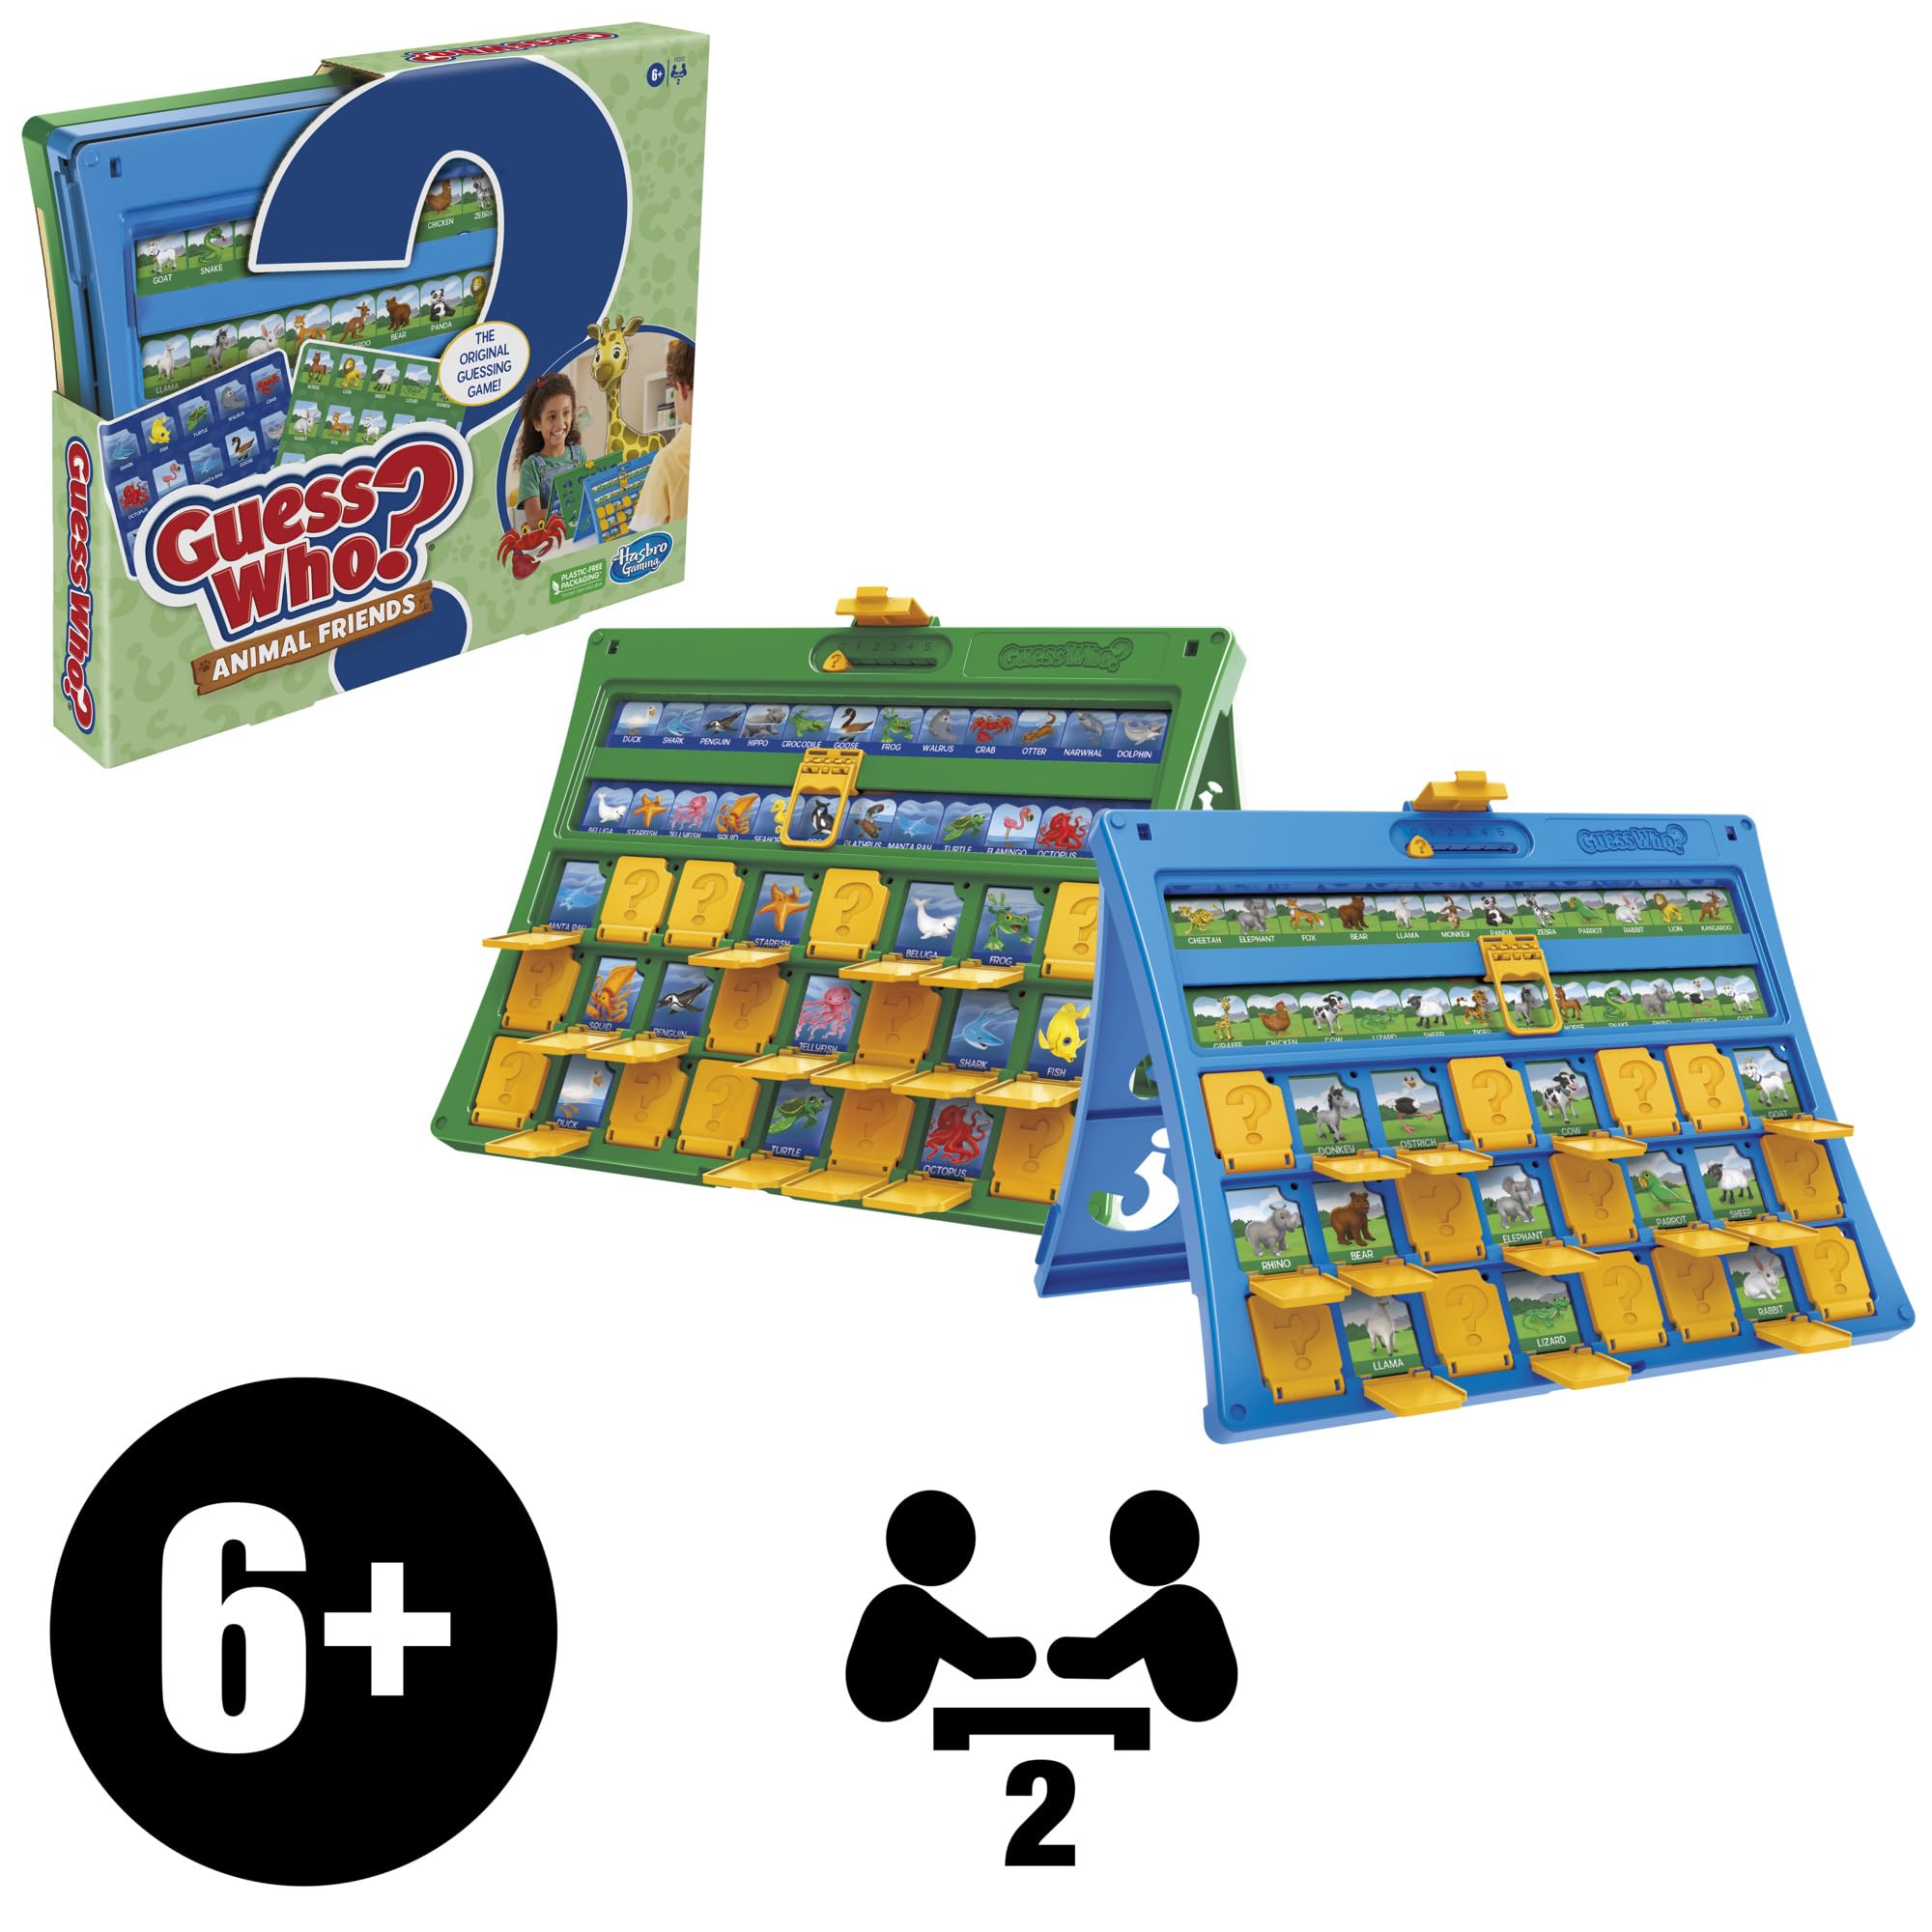 Hasbro Gaming Guess Who? Animal Friends Board Game for Kids Ages 6+, Guess Who? Game with Animals, Includes 2 Double-Sided Animal Sheets (Amazon Exclusive)